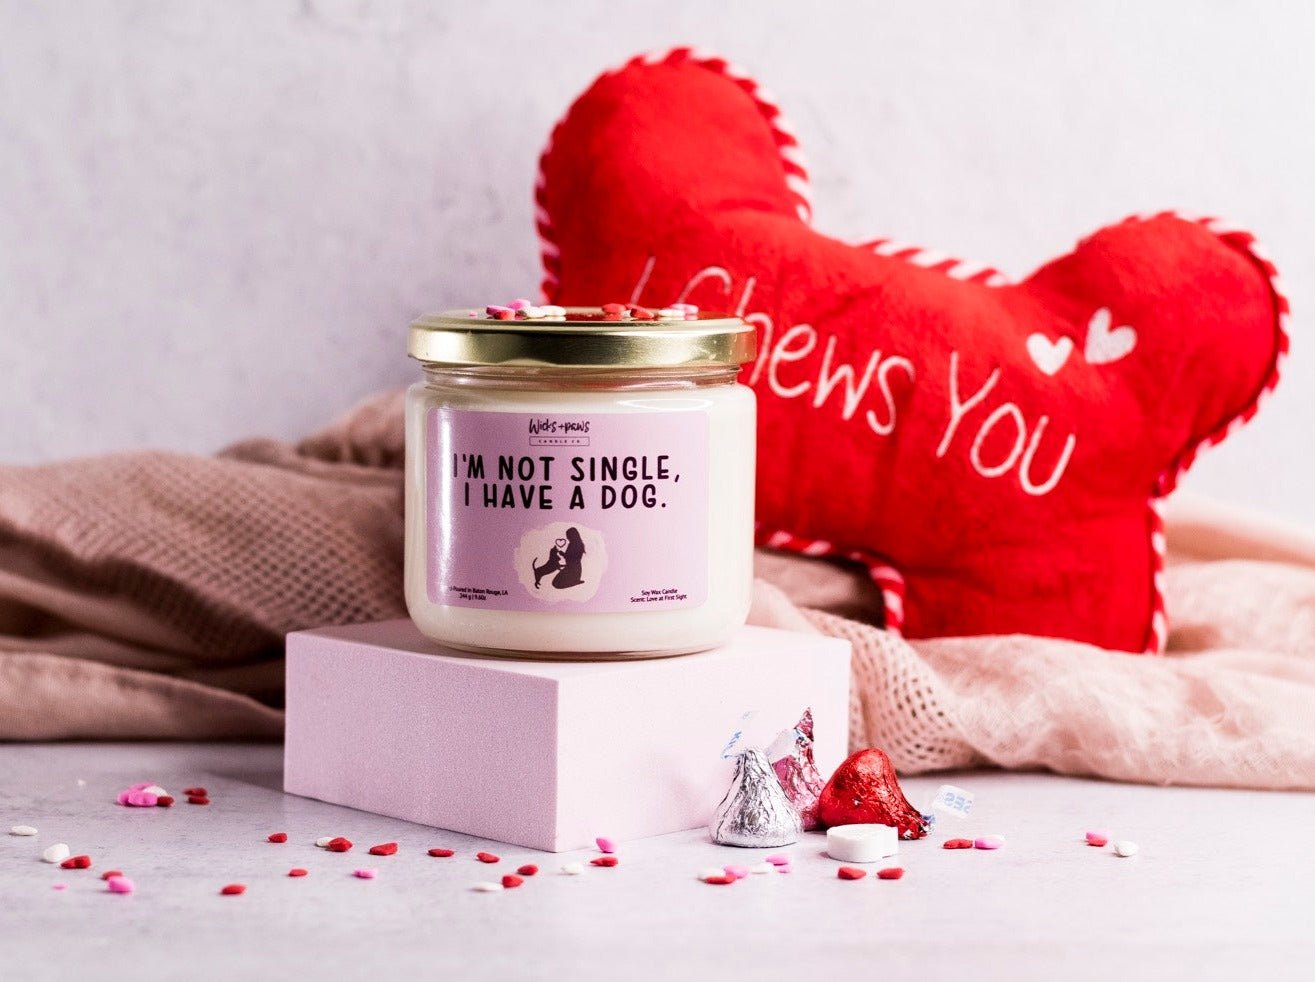 "Not Single" Soy Wax Candle - Wicks+Paws Candle Co